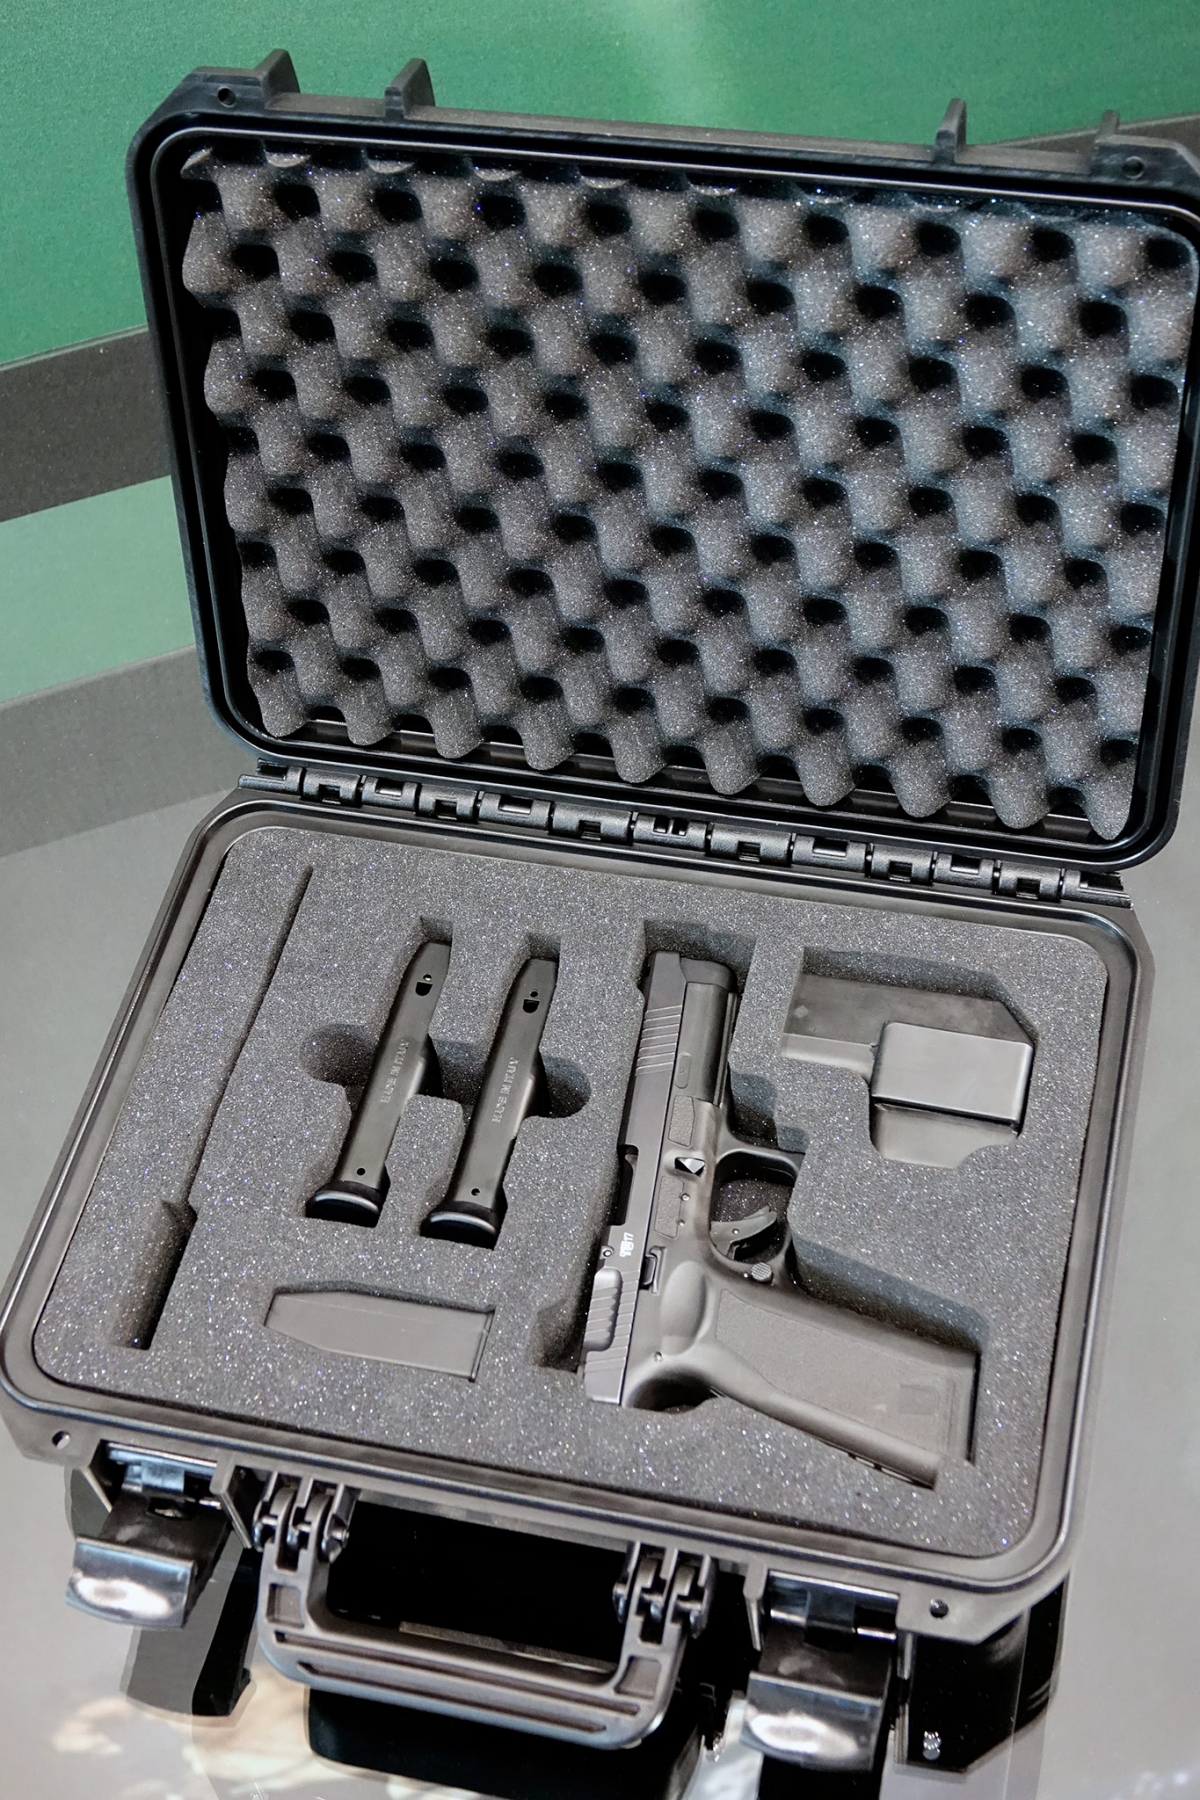 The Czech Small Arms Vz.15 pistol is sold in a foam-padded special case, jointly with two magazines, a magazine loader, a cleaning rod, and a dedicated holster